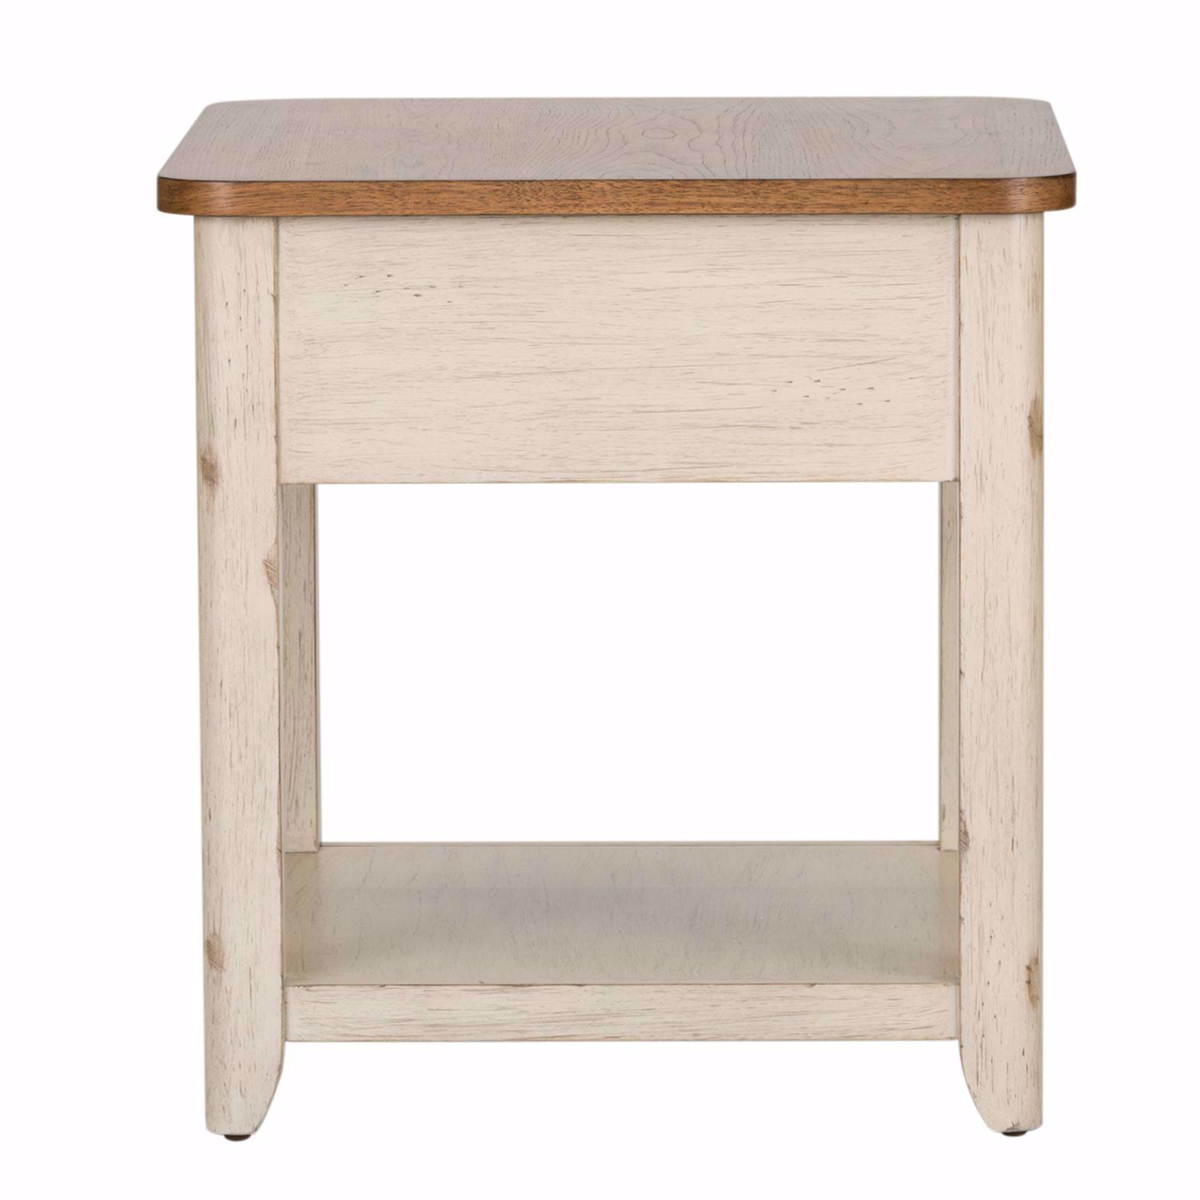 Picture of Roanoak End Table with Basket